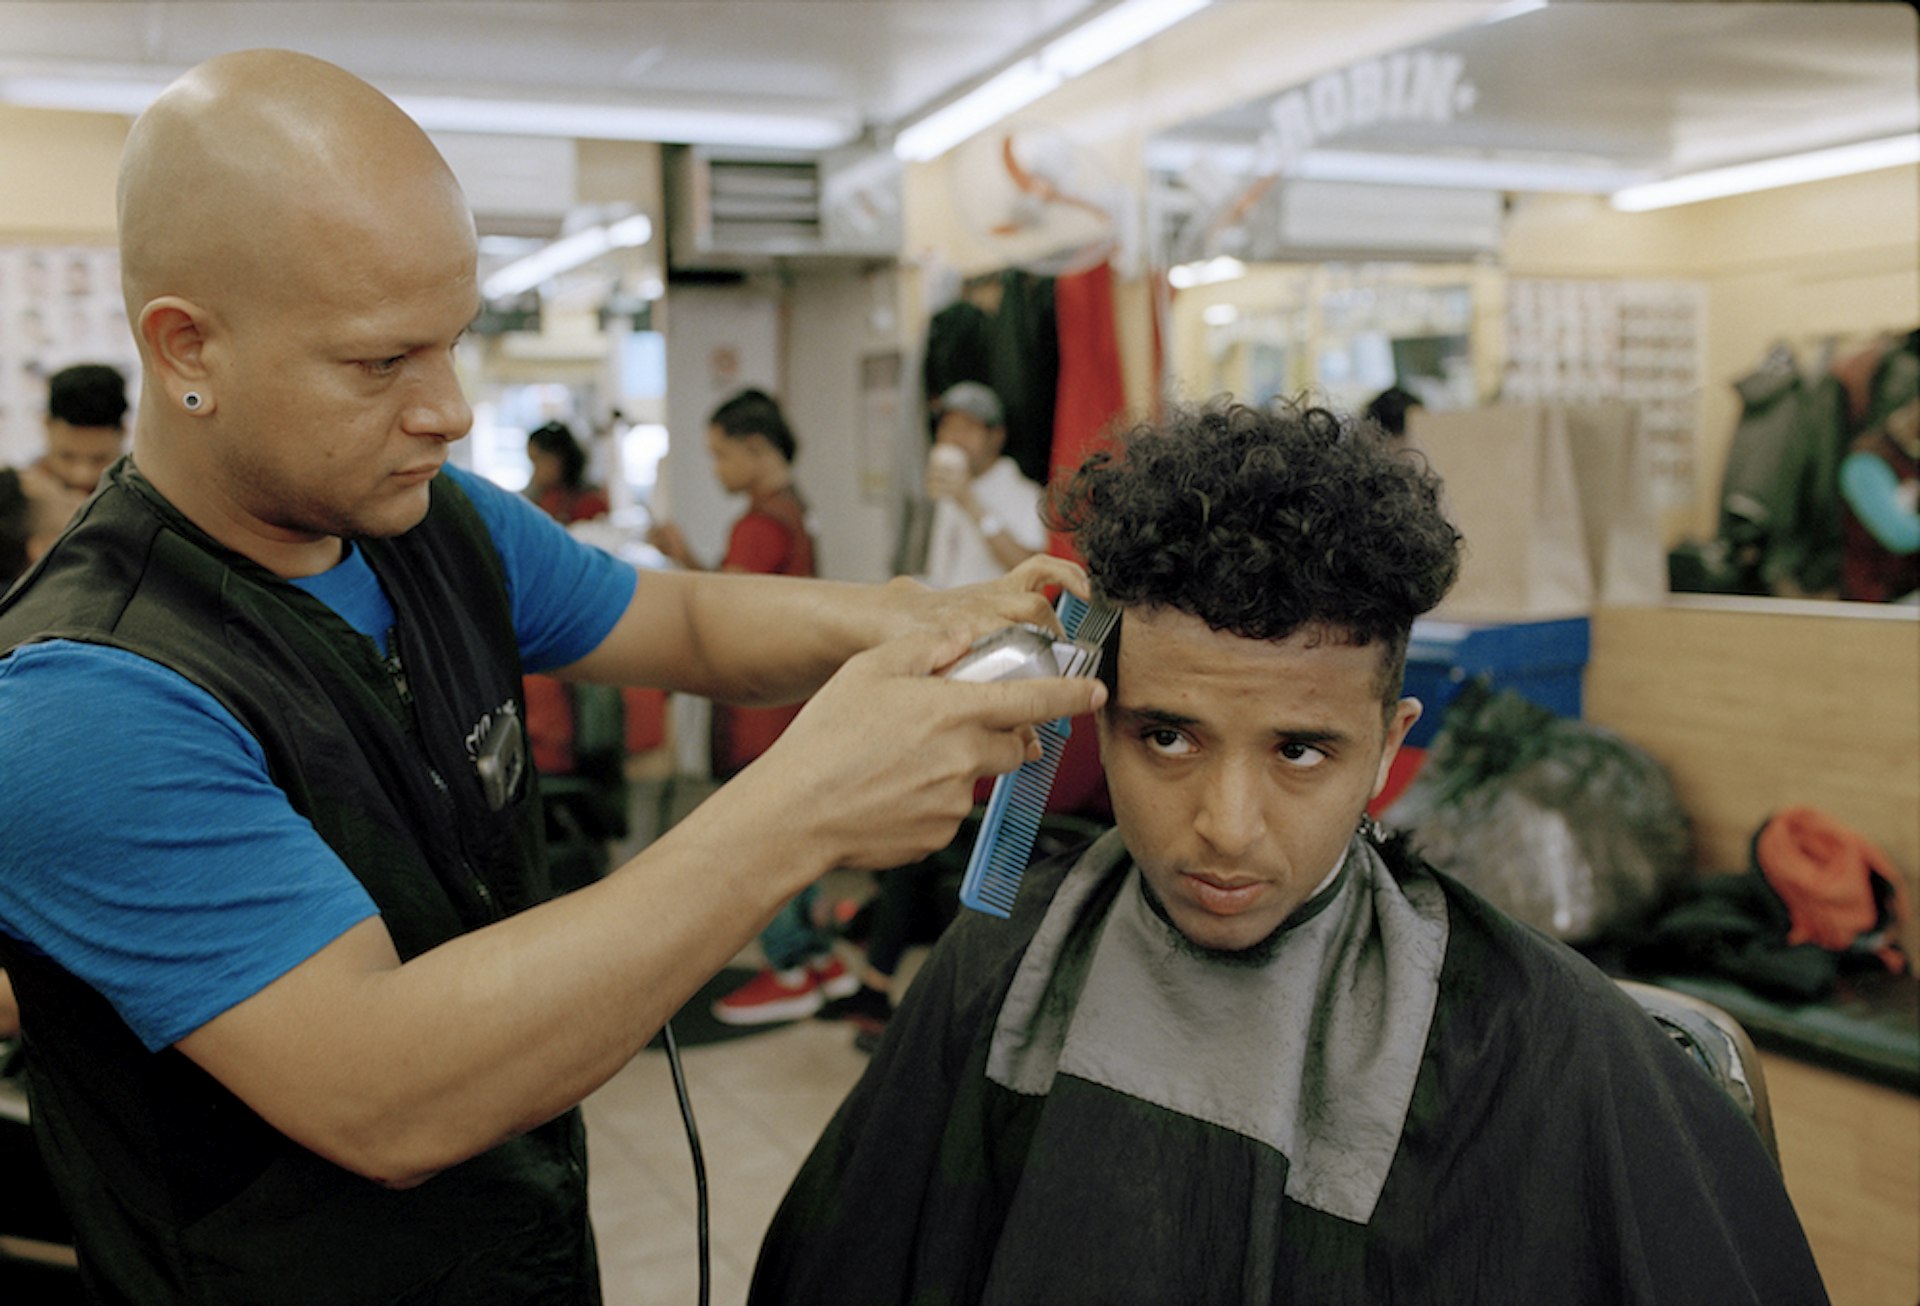 Ahmed Alzandhani gets a medium skin fade the day before a soccer match at a Dominican barbershop in the Flatbush neighbourhood of Brooklyn.